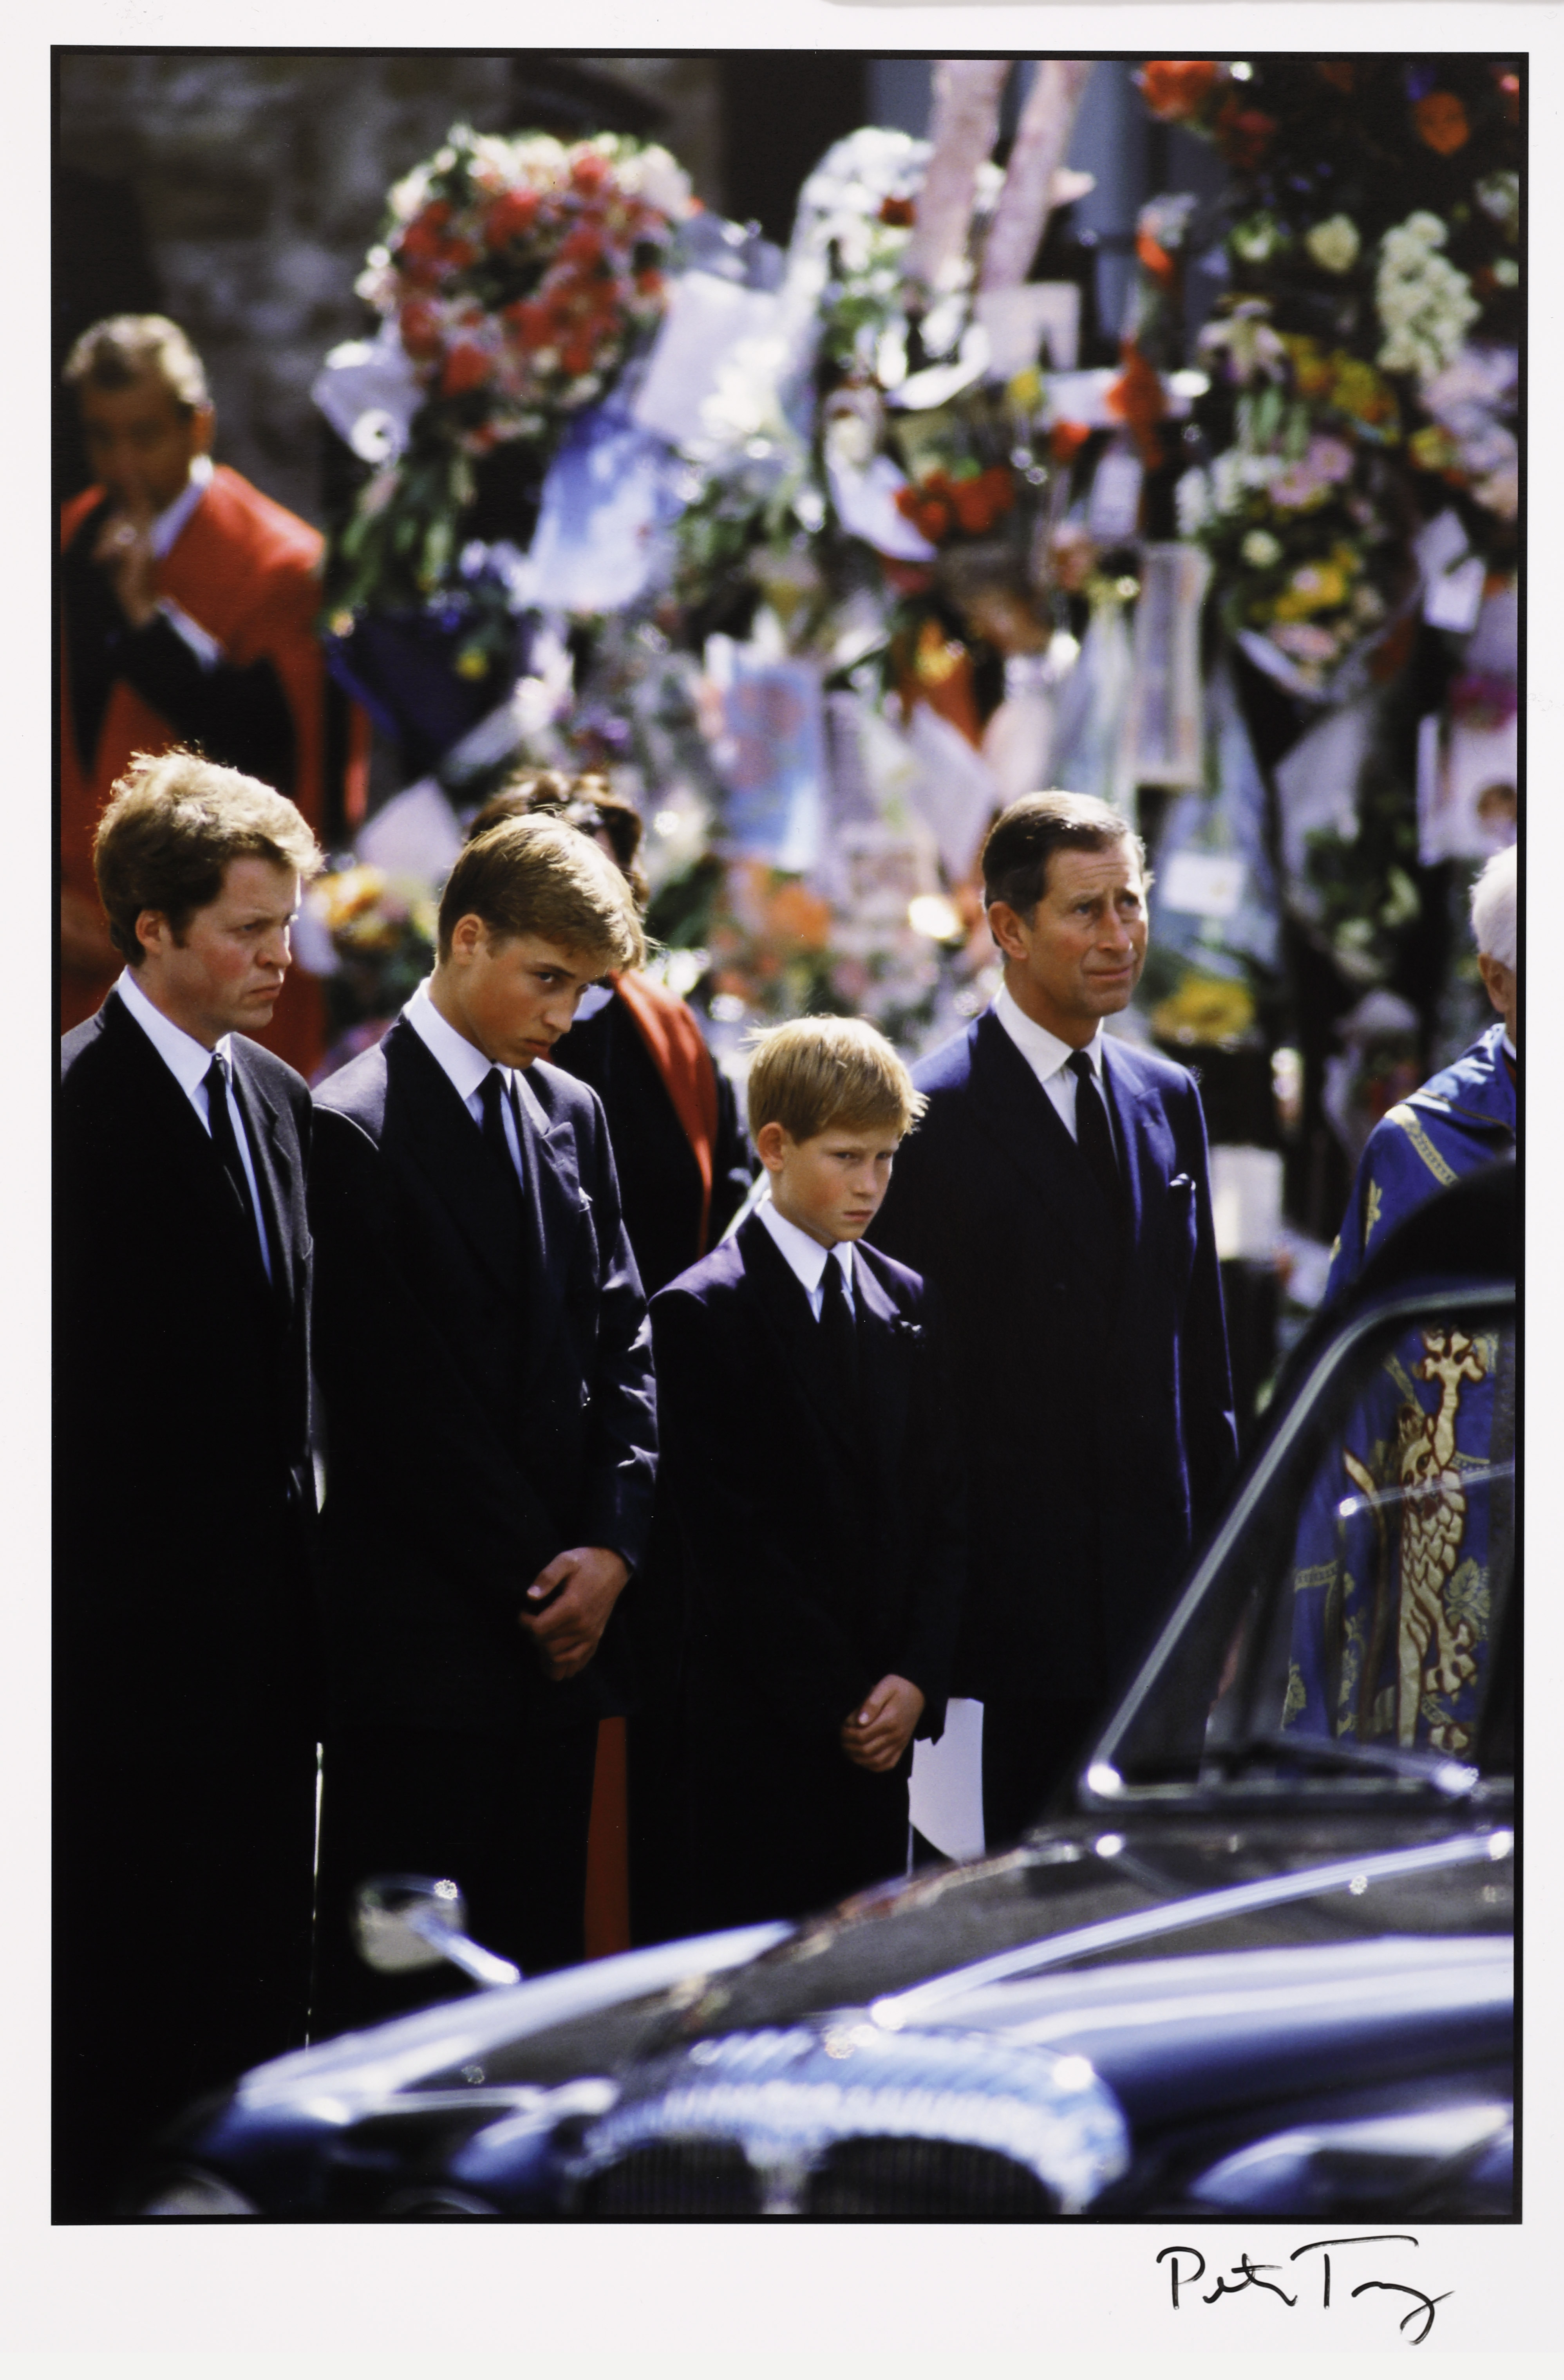 Peter Turnley. Funeral of Princess Diana, London, England, 1997. Archival pigment print